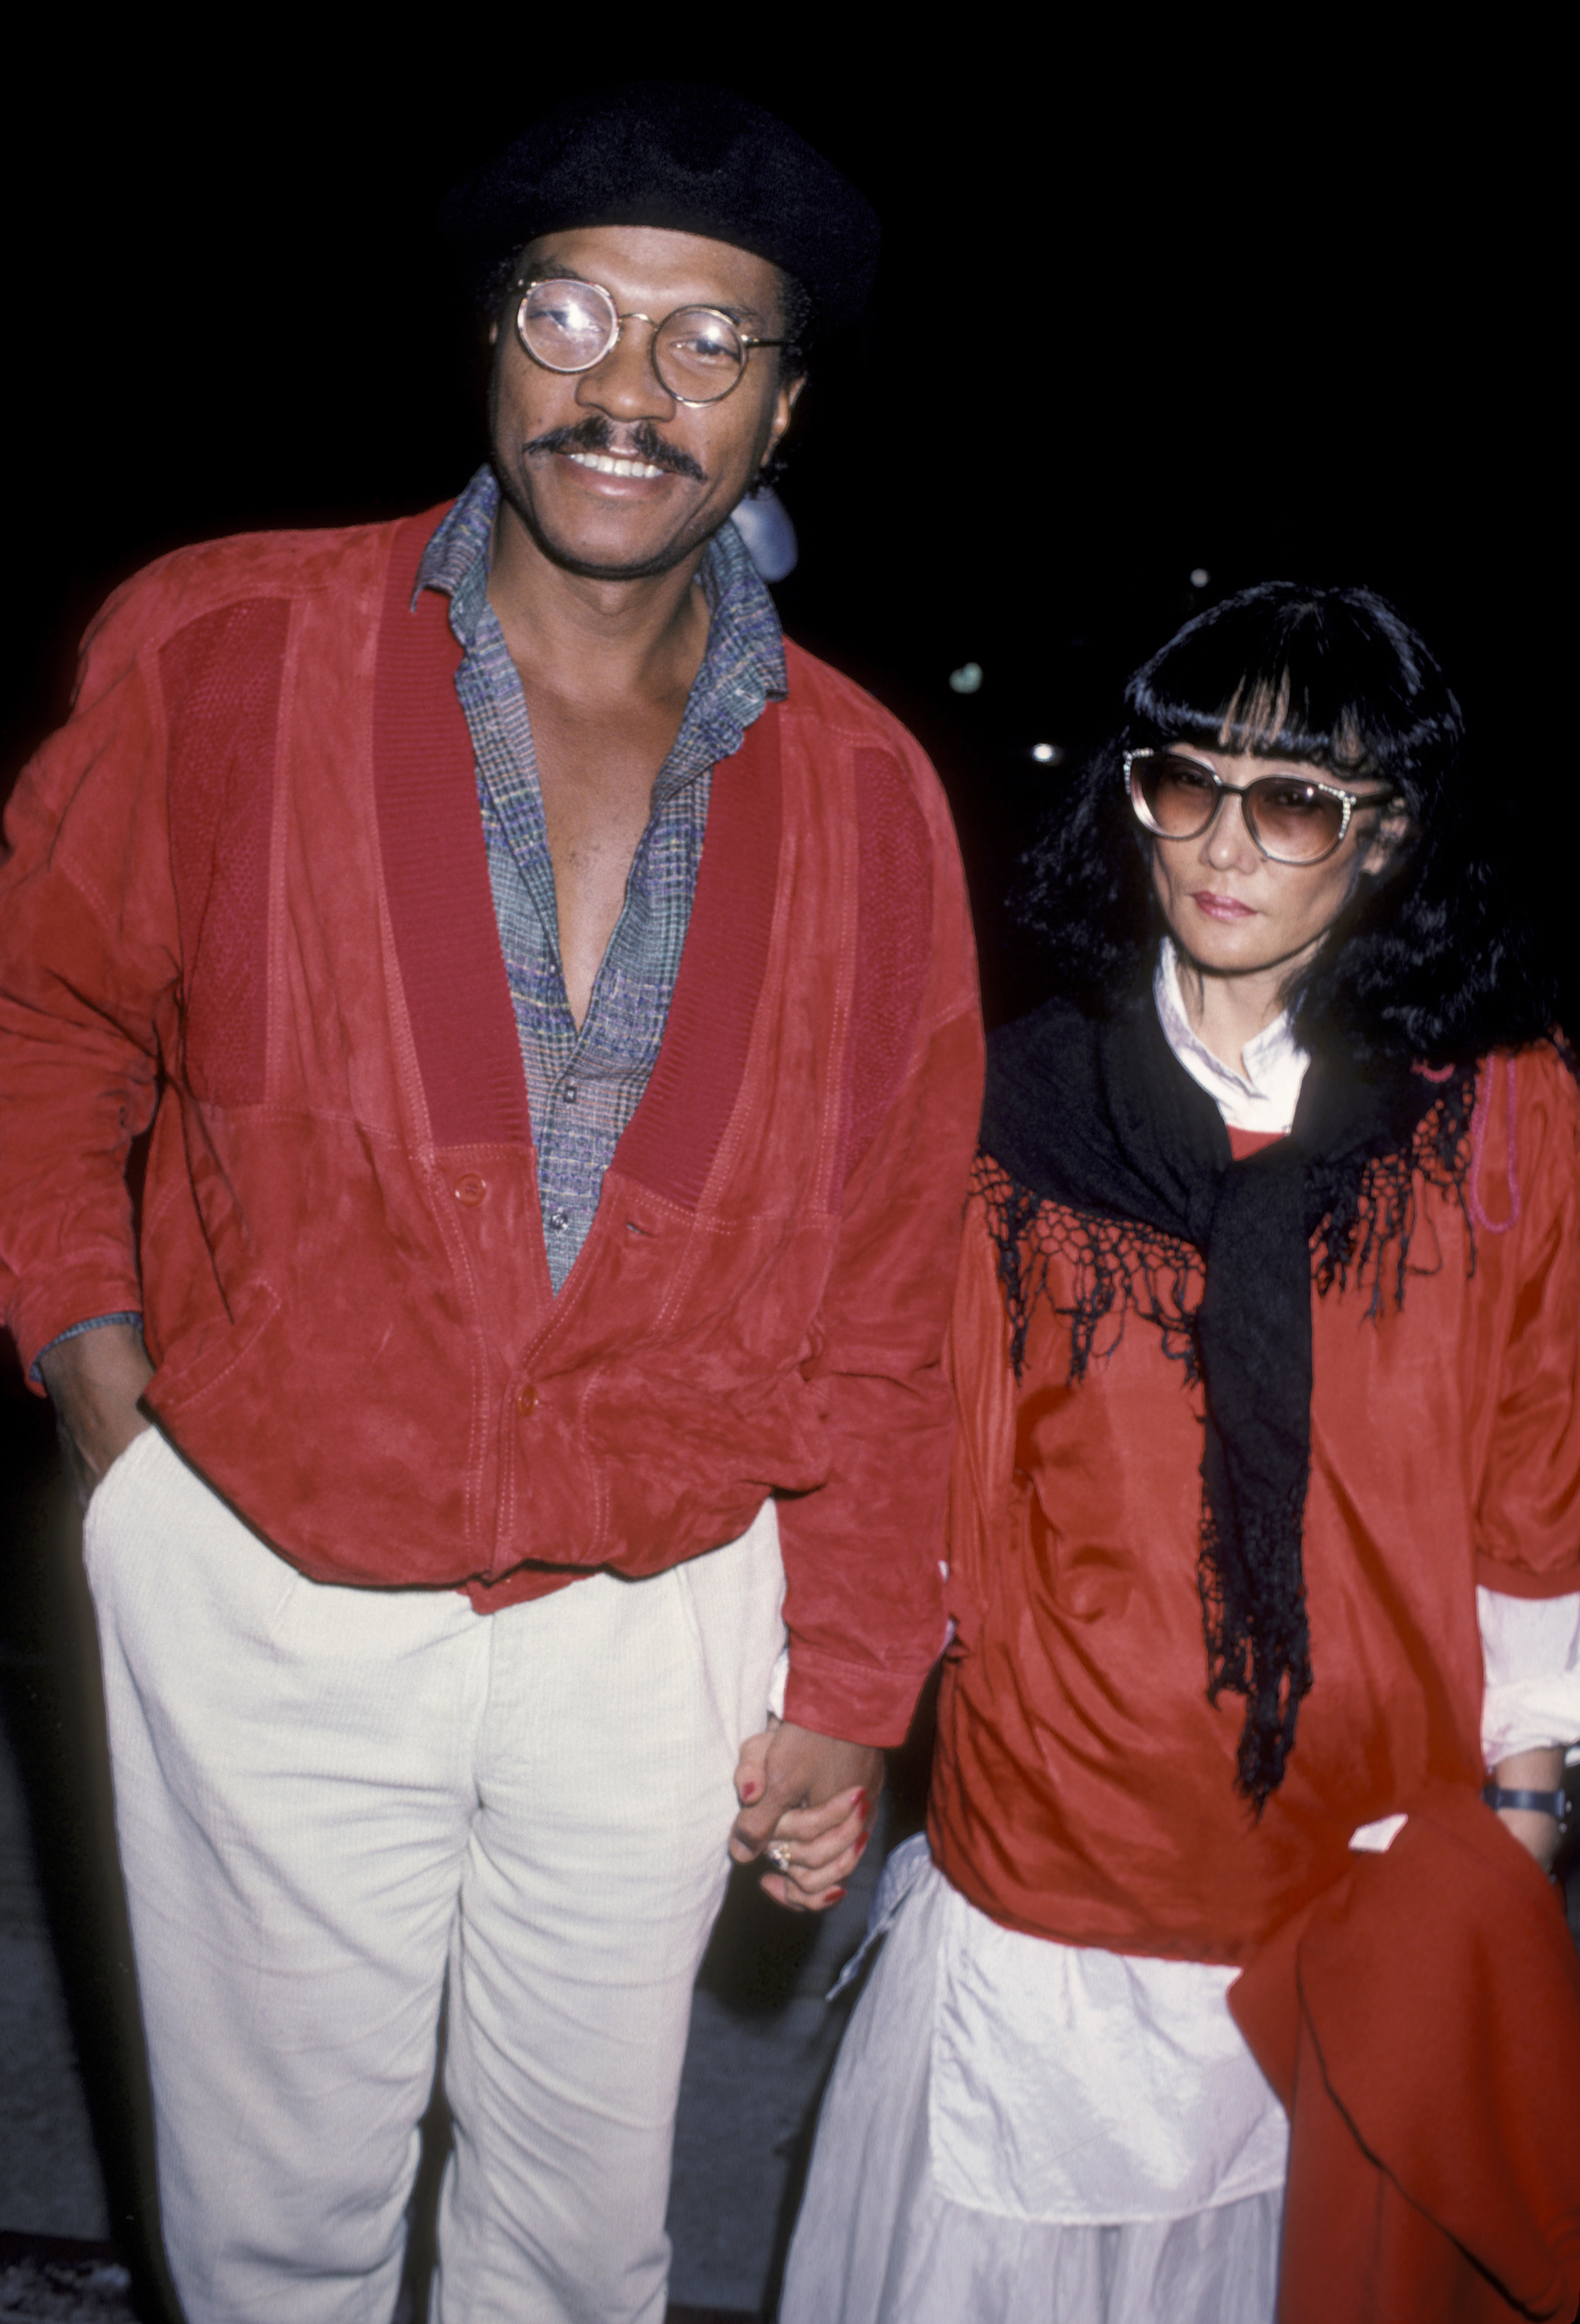 Billy Dee Williams and Teruko Nakagami at the premiere of "A Fine Mess" on March 19, 1986, in Hollywood, California. | Source: Getty Images